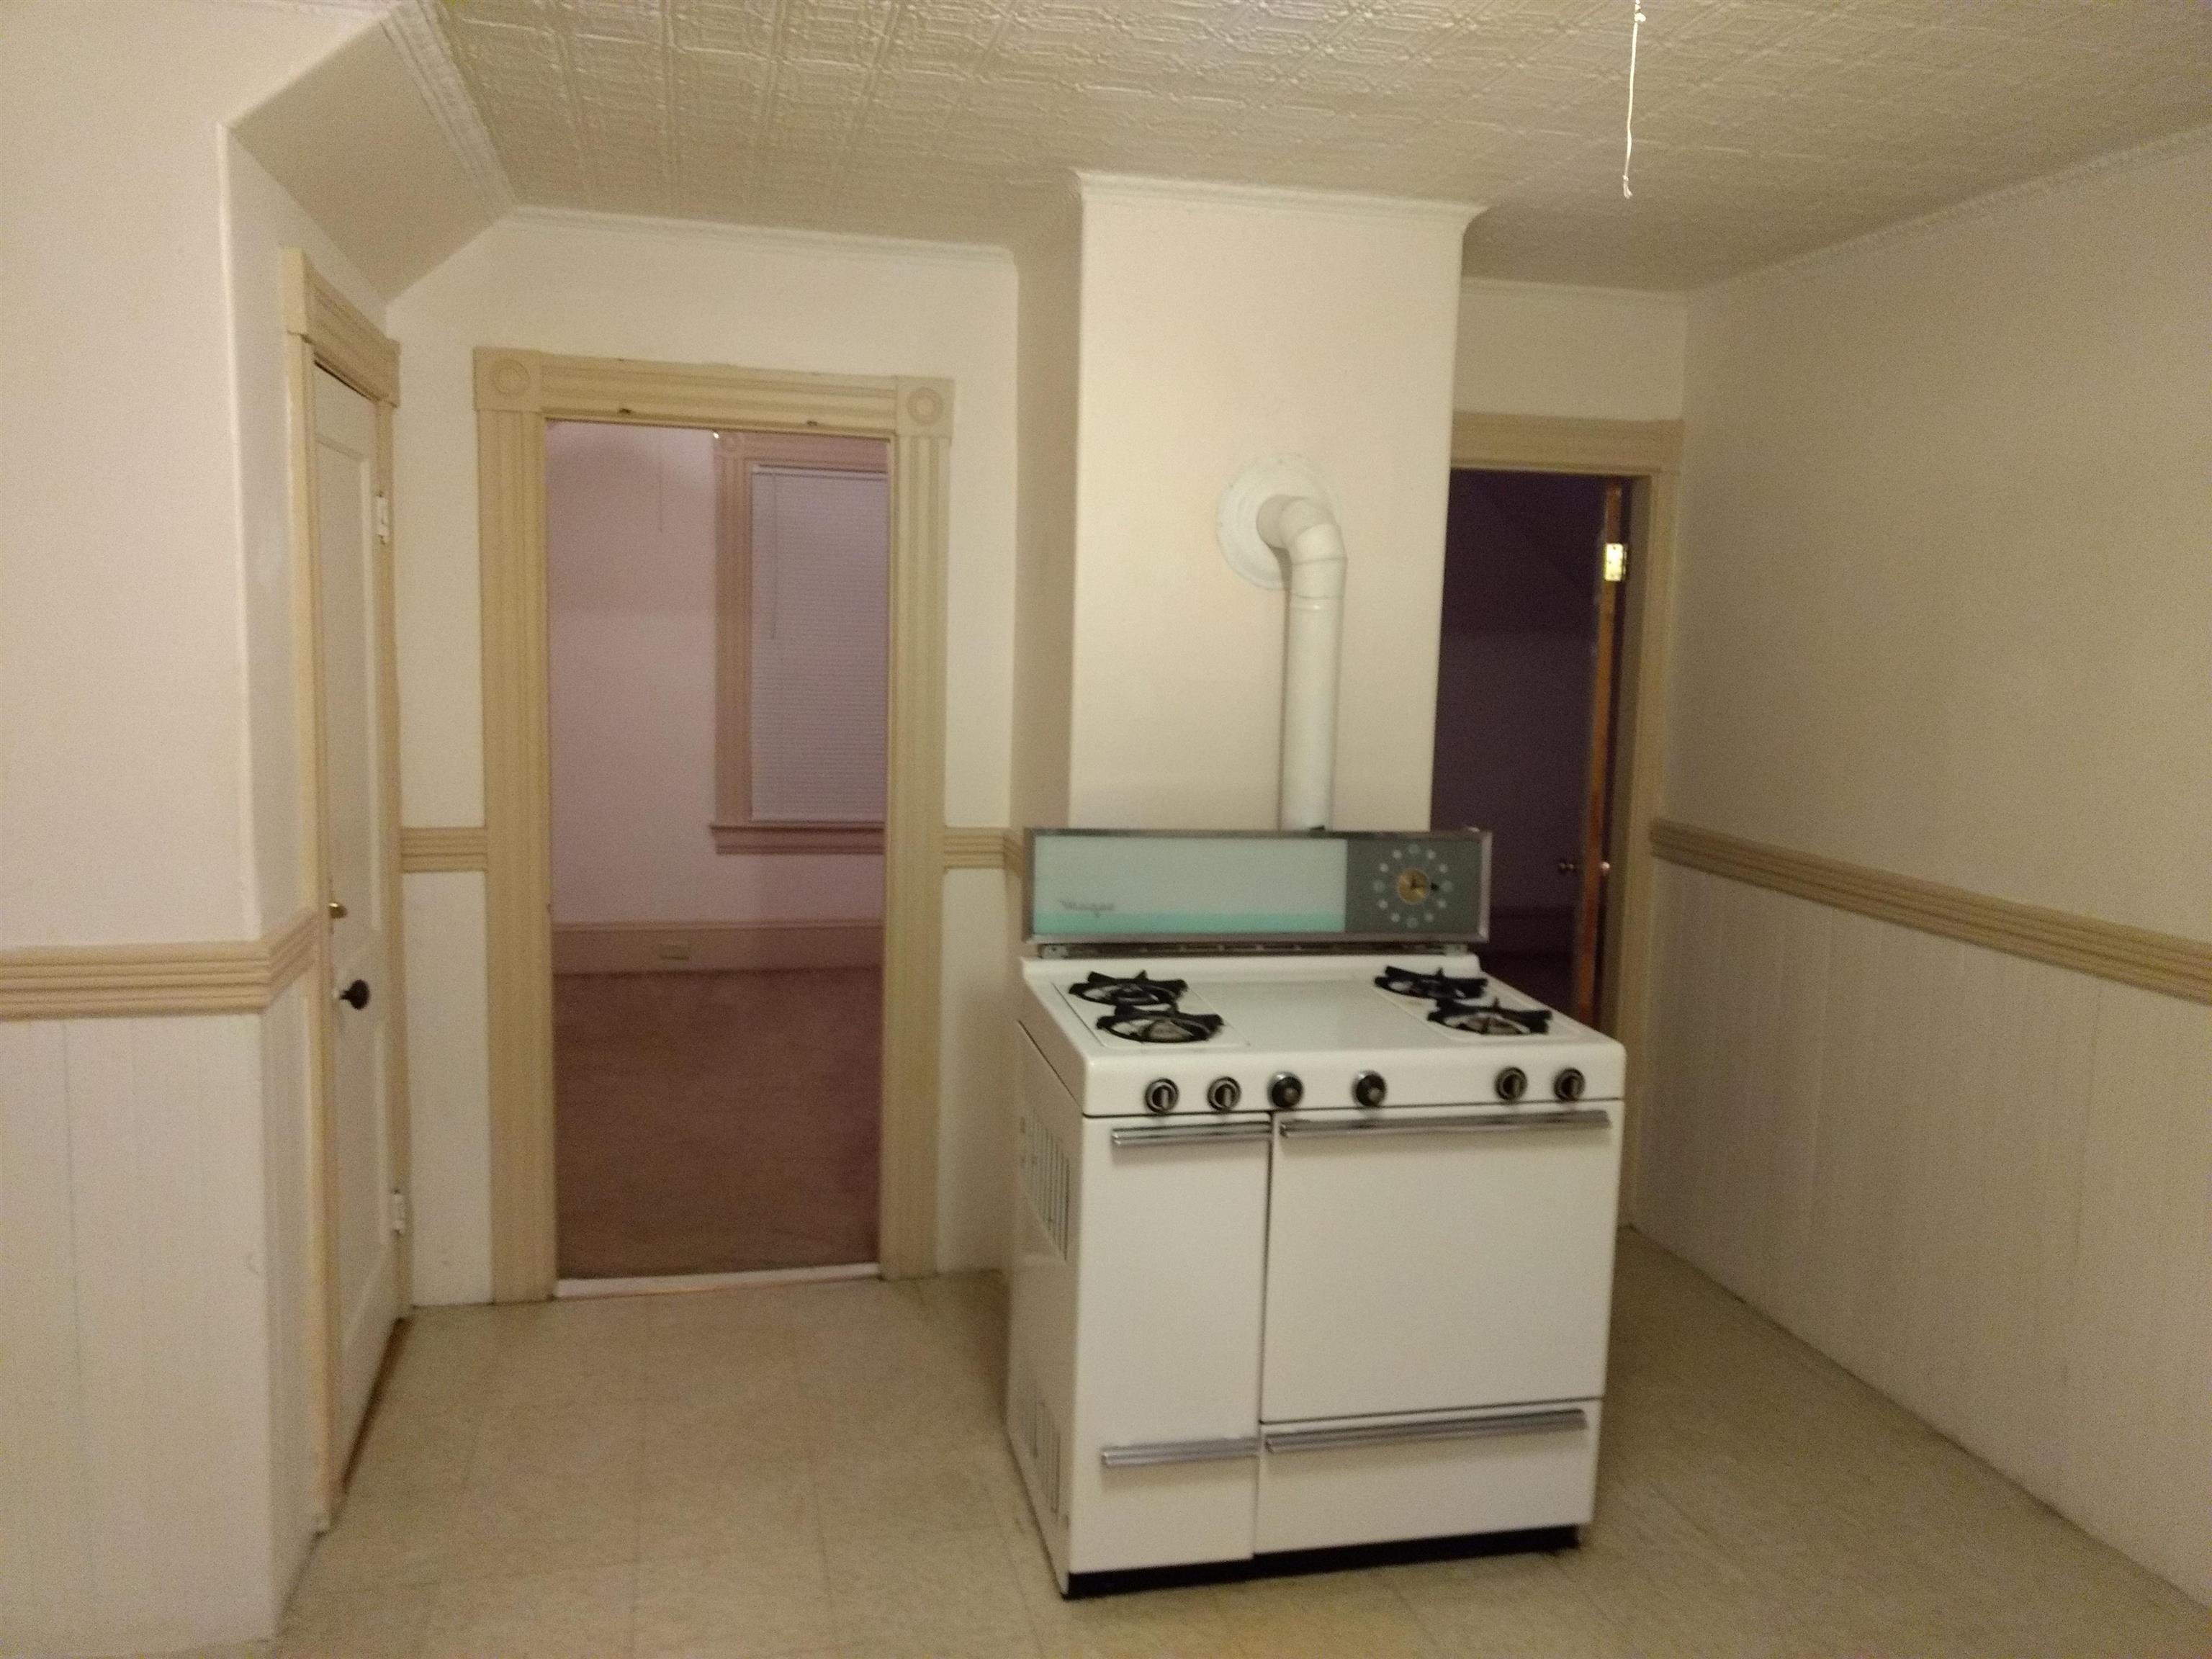 Unit 3 kitchen to living and bedroom